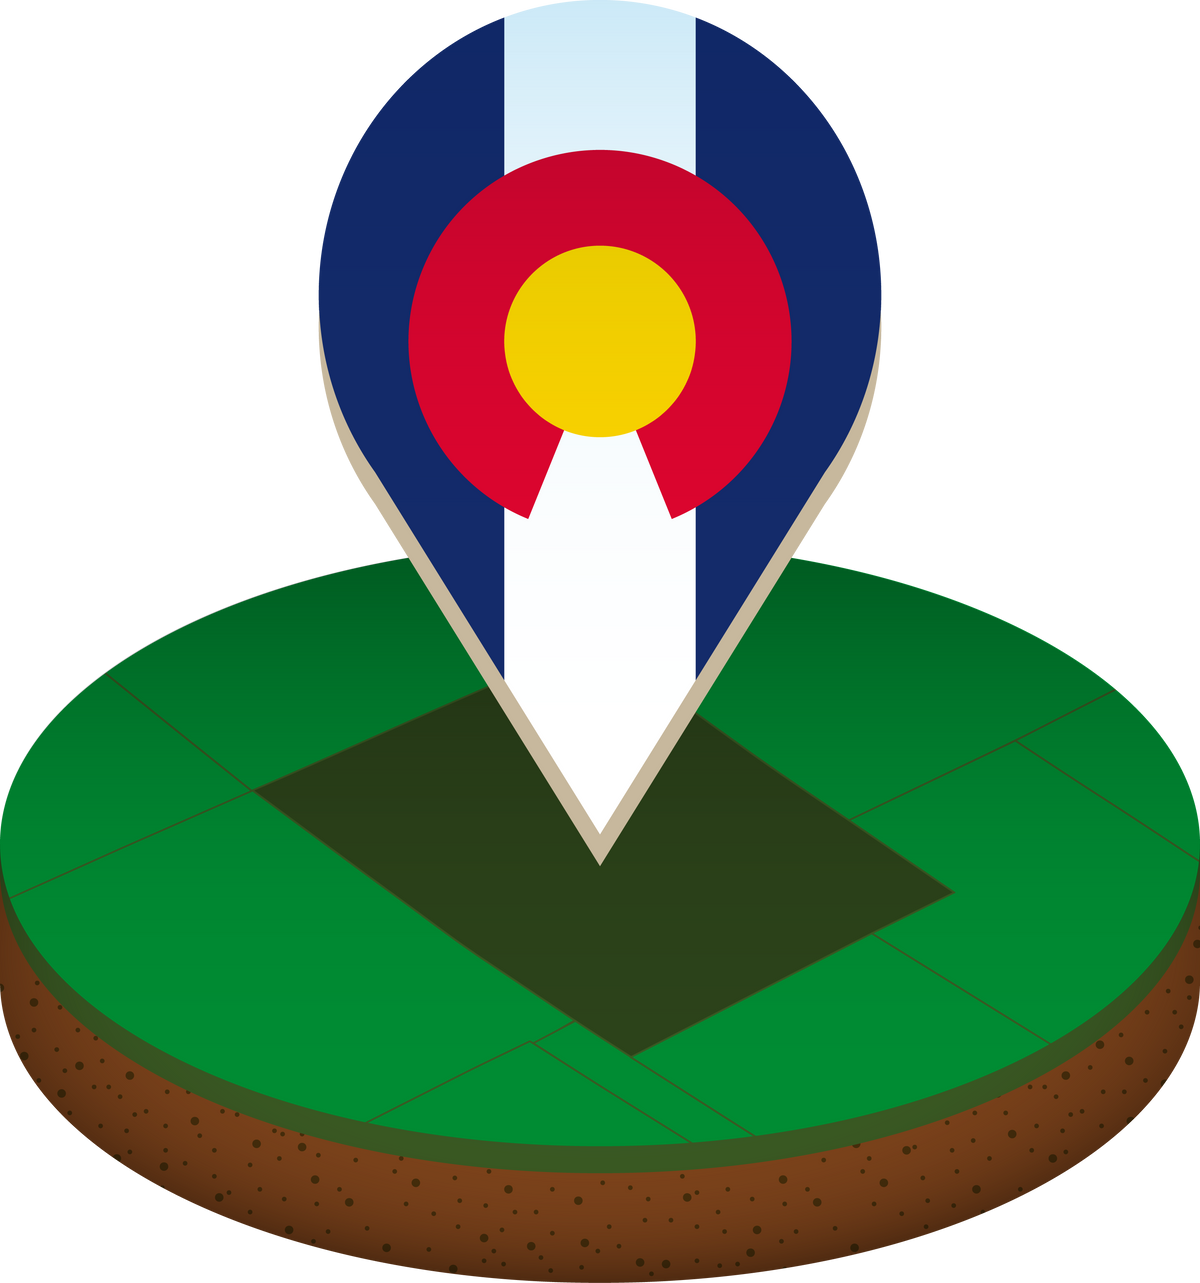 Isometric round map of Colorado with flag.